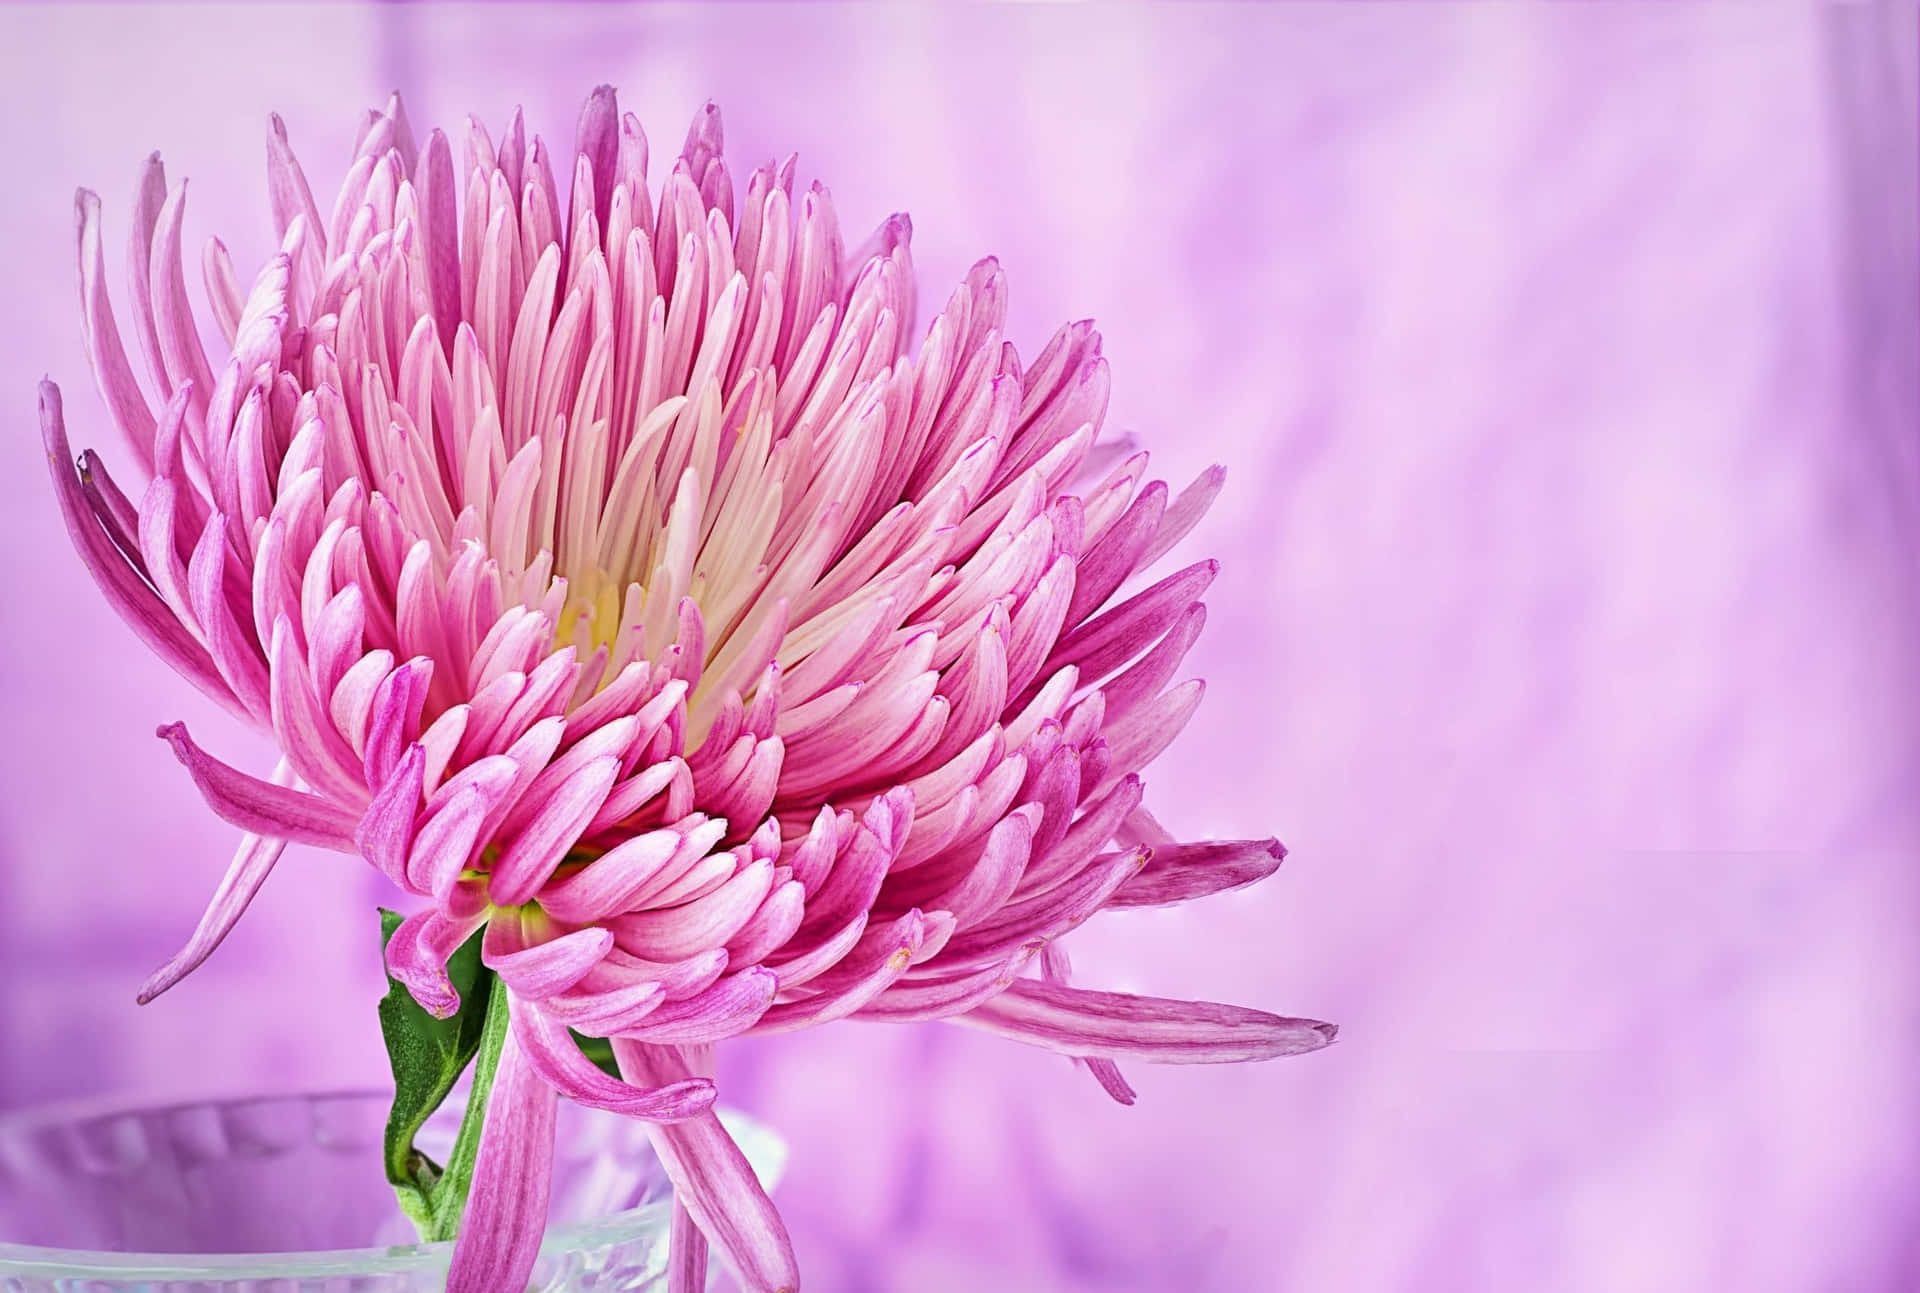 Blooming beauty - Pink Floral Background